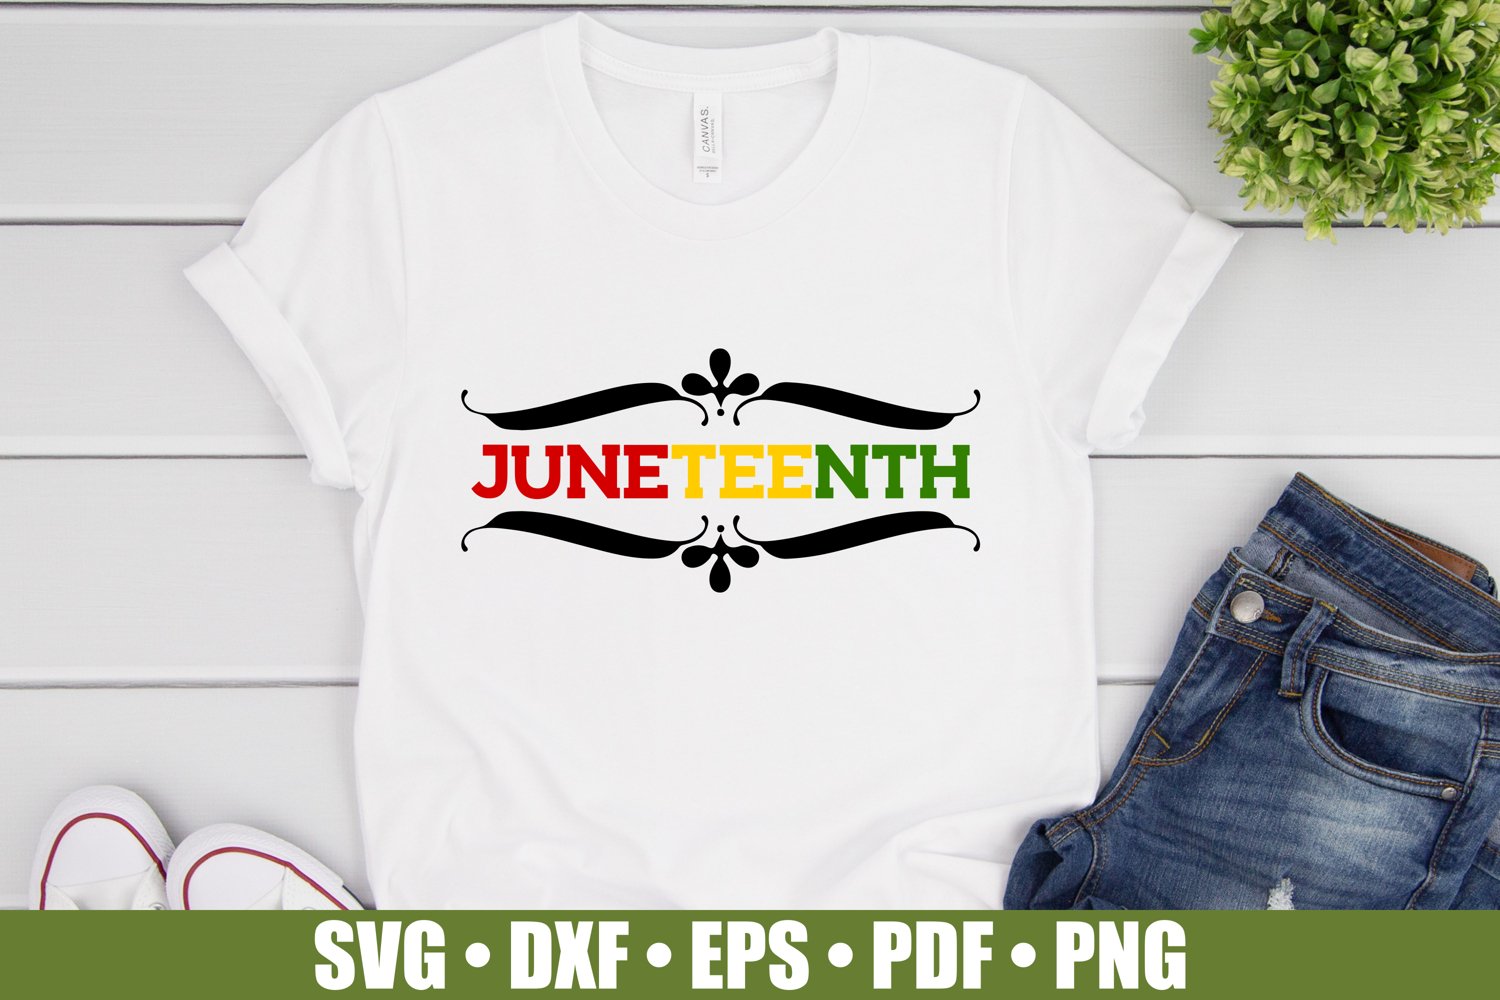 Juneteenth colorful print on t-shirt.